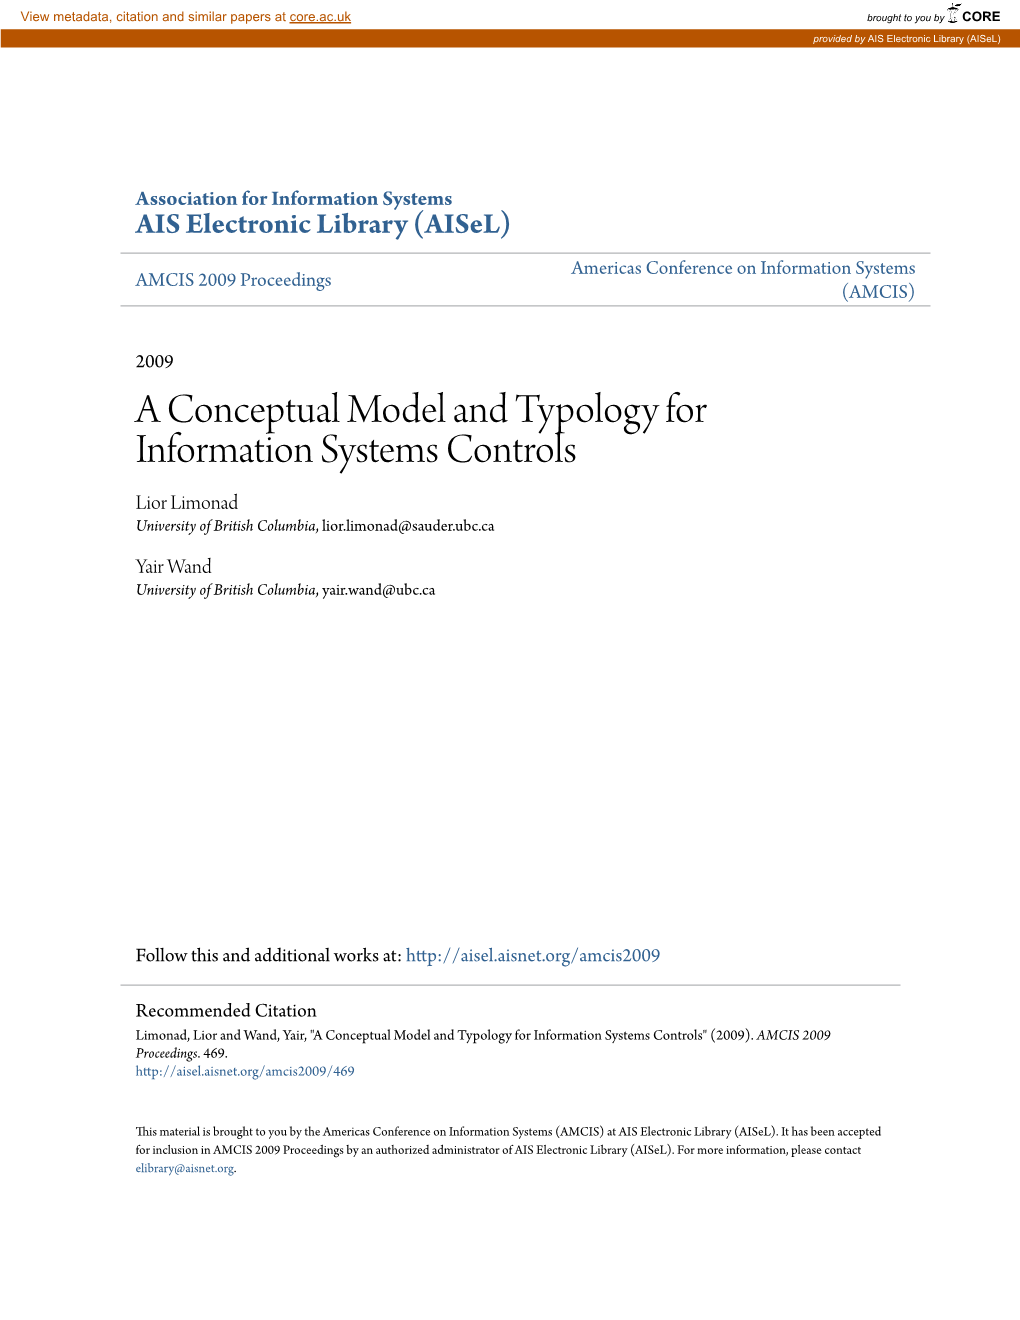 A Conceptual Model and Typology for Information Systems Controls Lior Limonad University of British Columbia, Lior.Limonad@Sauder.Ubc.Ca